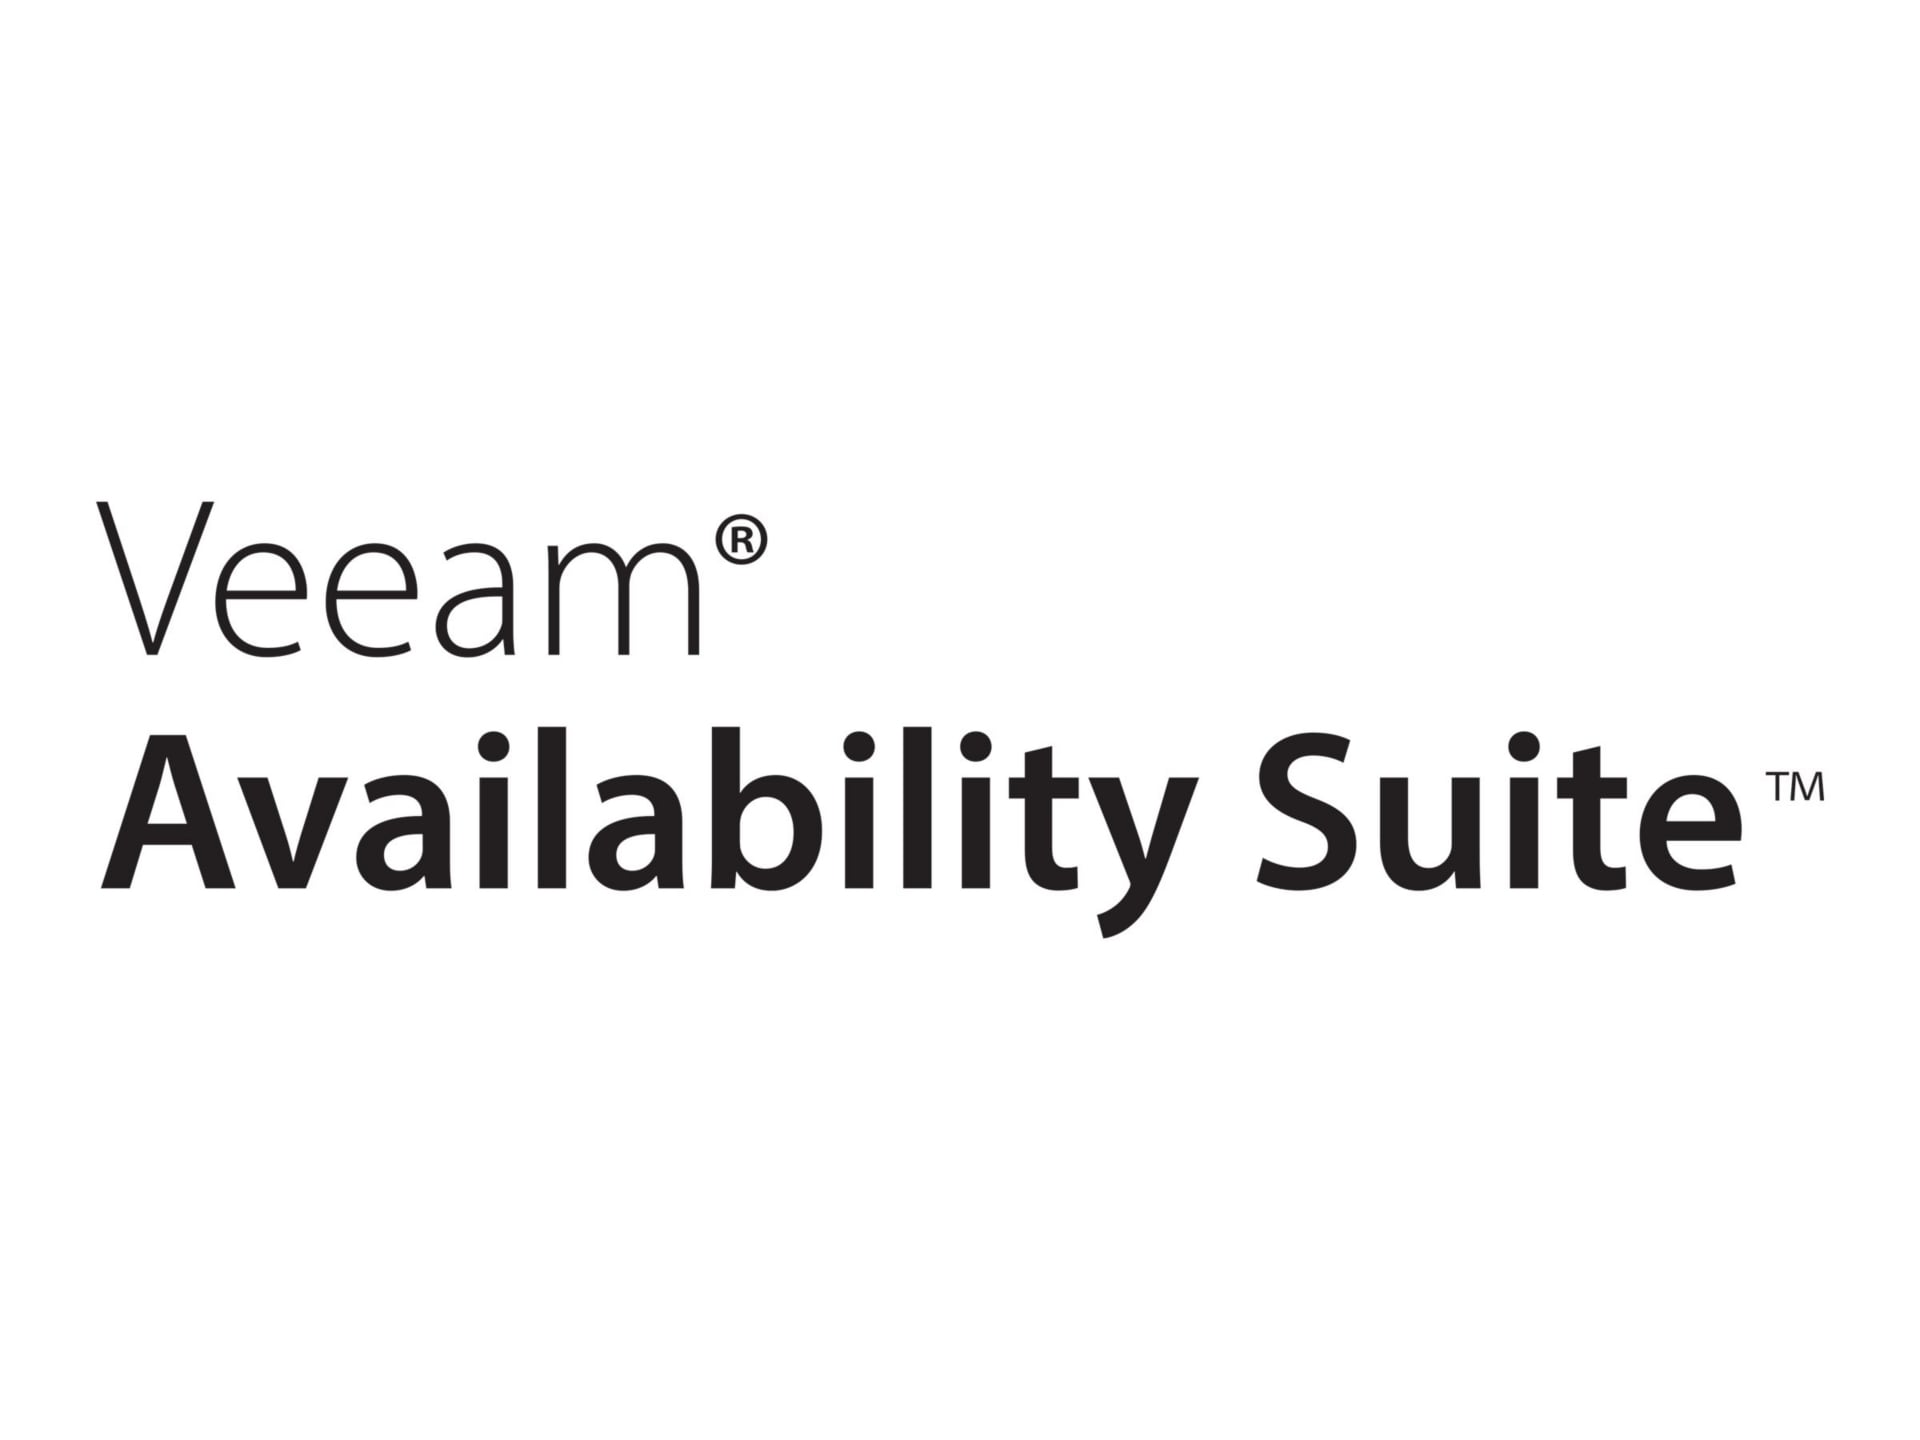 Veeam Availability Suite Universal License - Upfront Billing License (migration license) (3 years) + Production Support